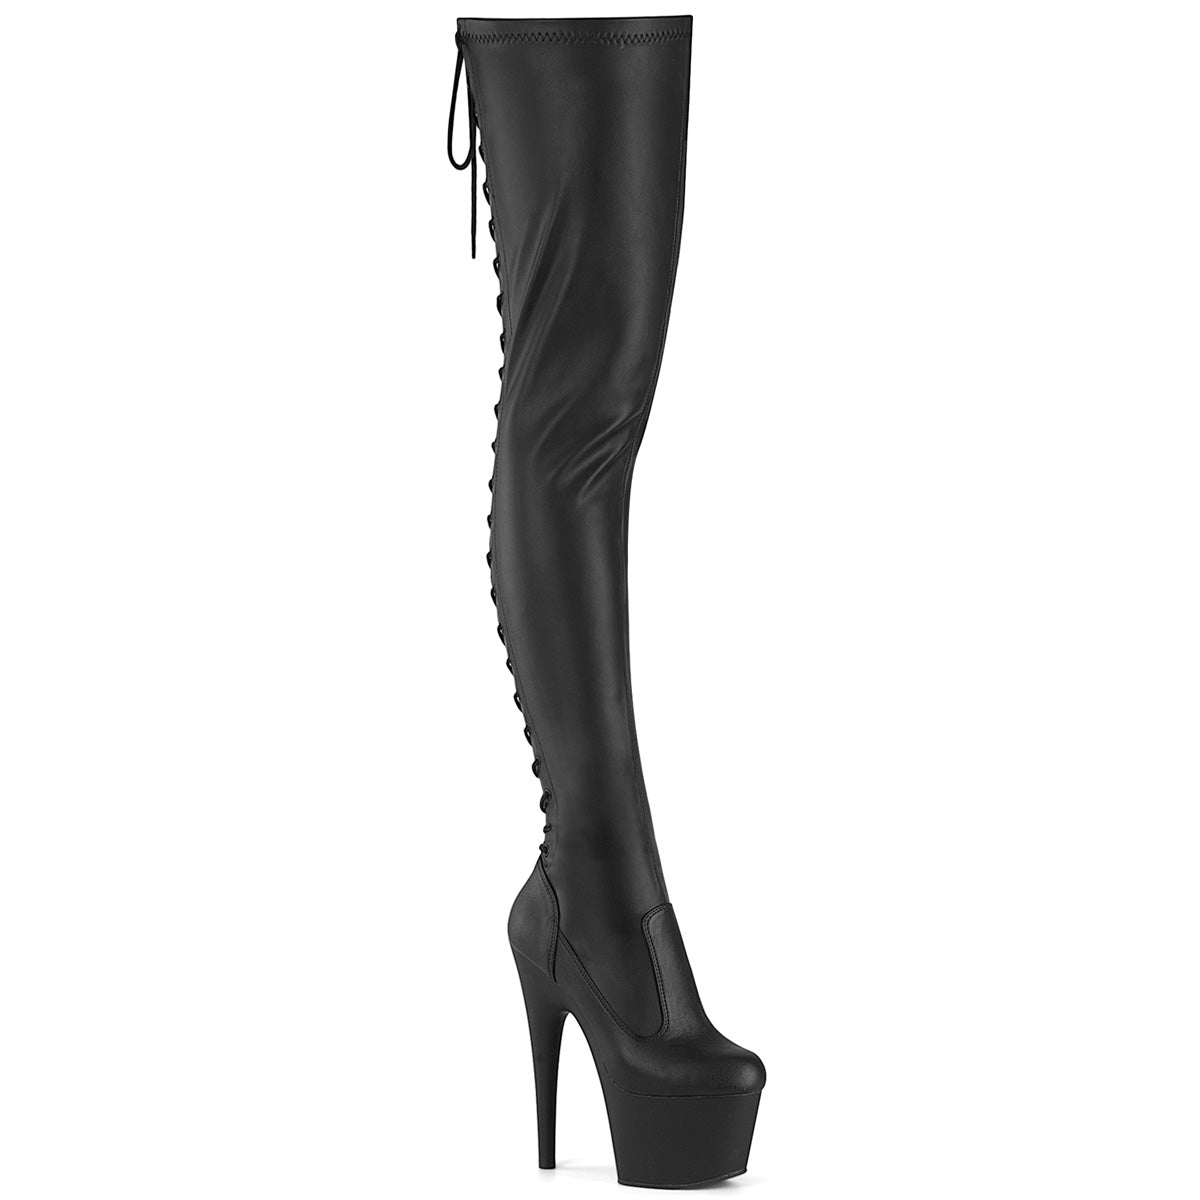 ADORE-3850 Lace-Up Back Stretch Thigh Boot Black Multi view 1